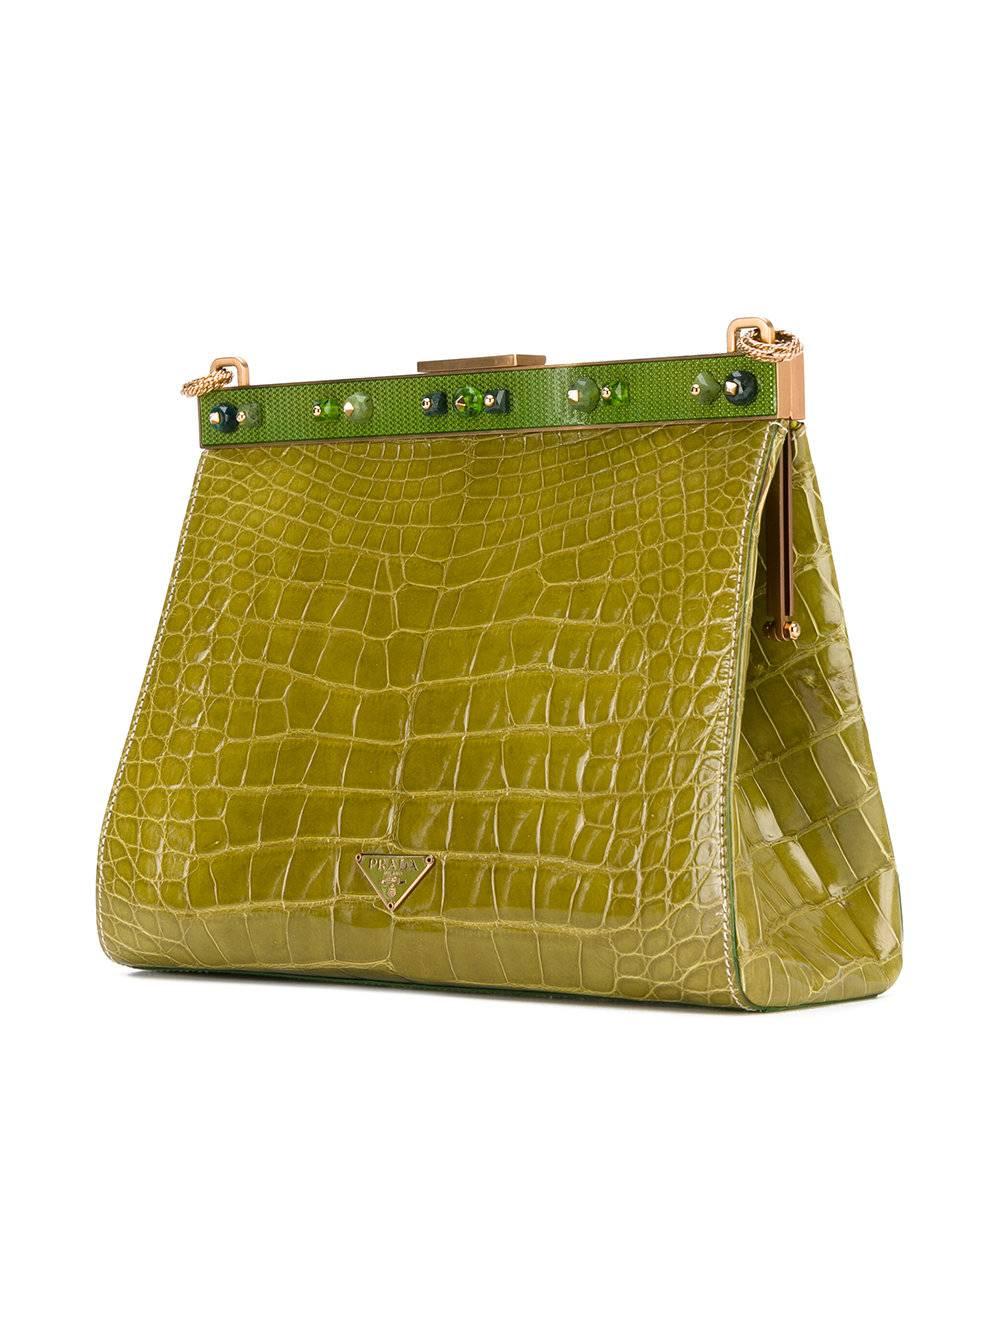 Marvelous acid green crocodile leather chain clutch by Prada. It features a chain strap, a top magnetic closure, gemstone embellishments and an internal zipped pocket. The item is vintage, it was produced in the 2000s and is in excellent conditions,